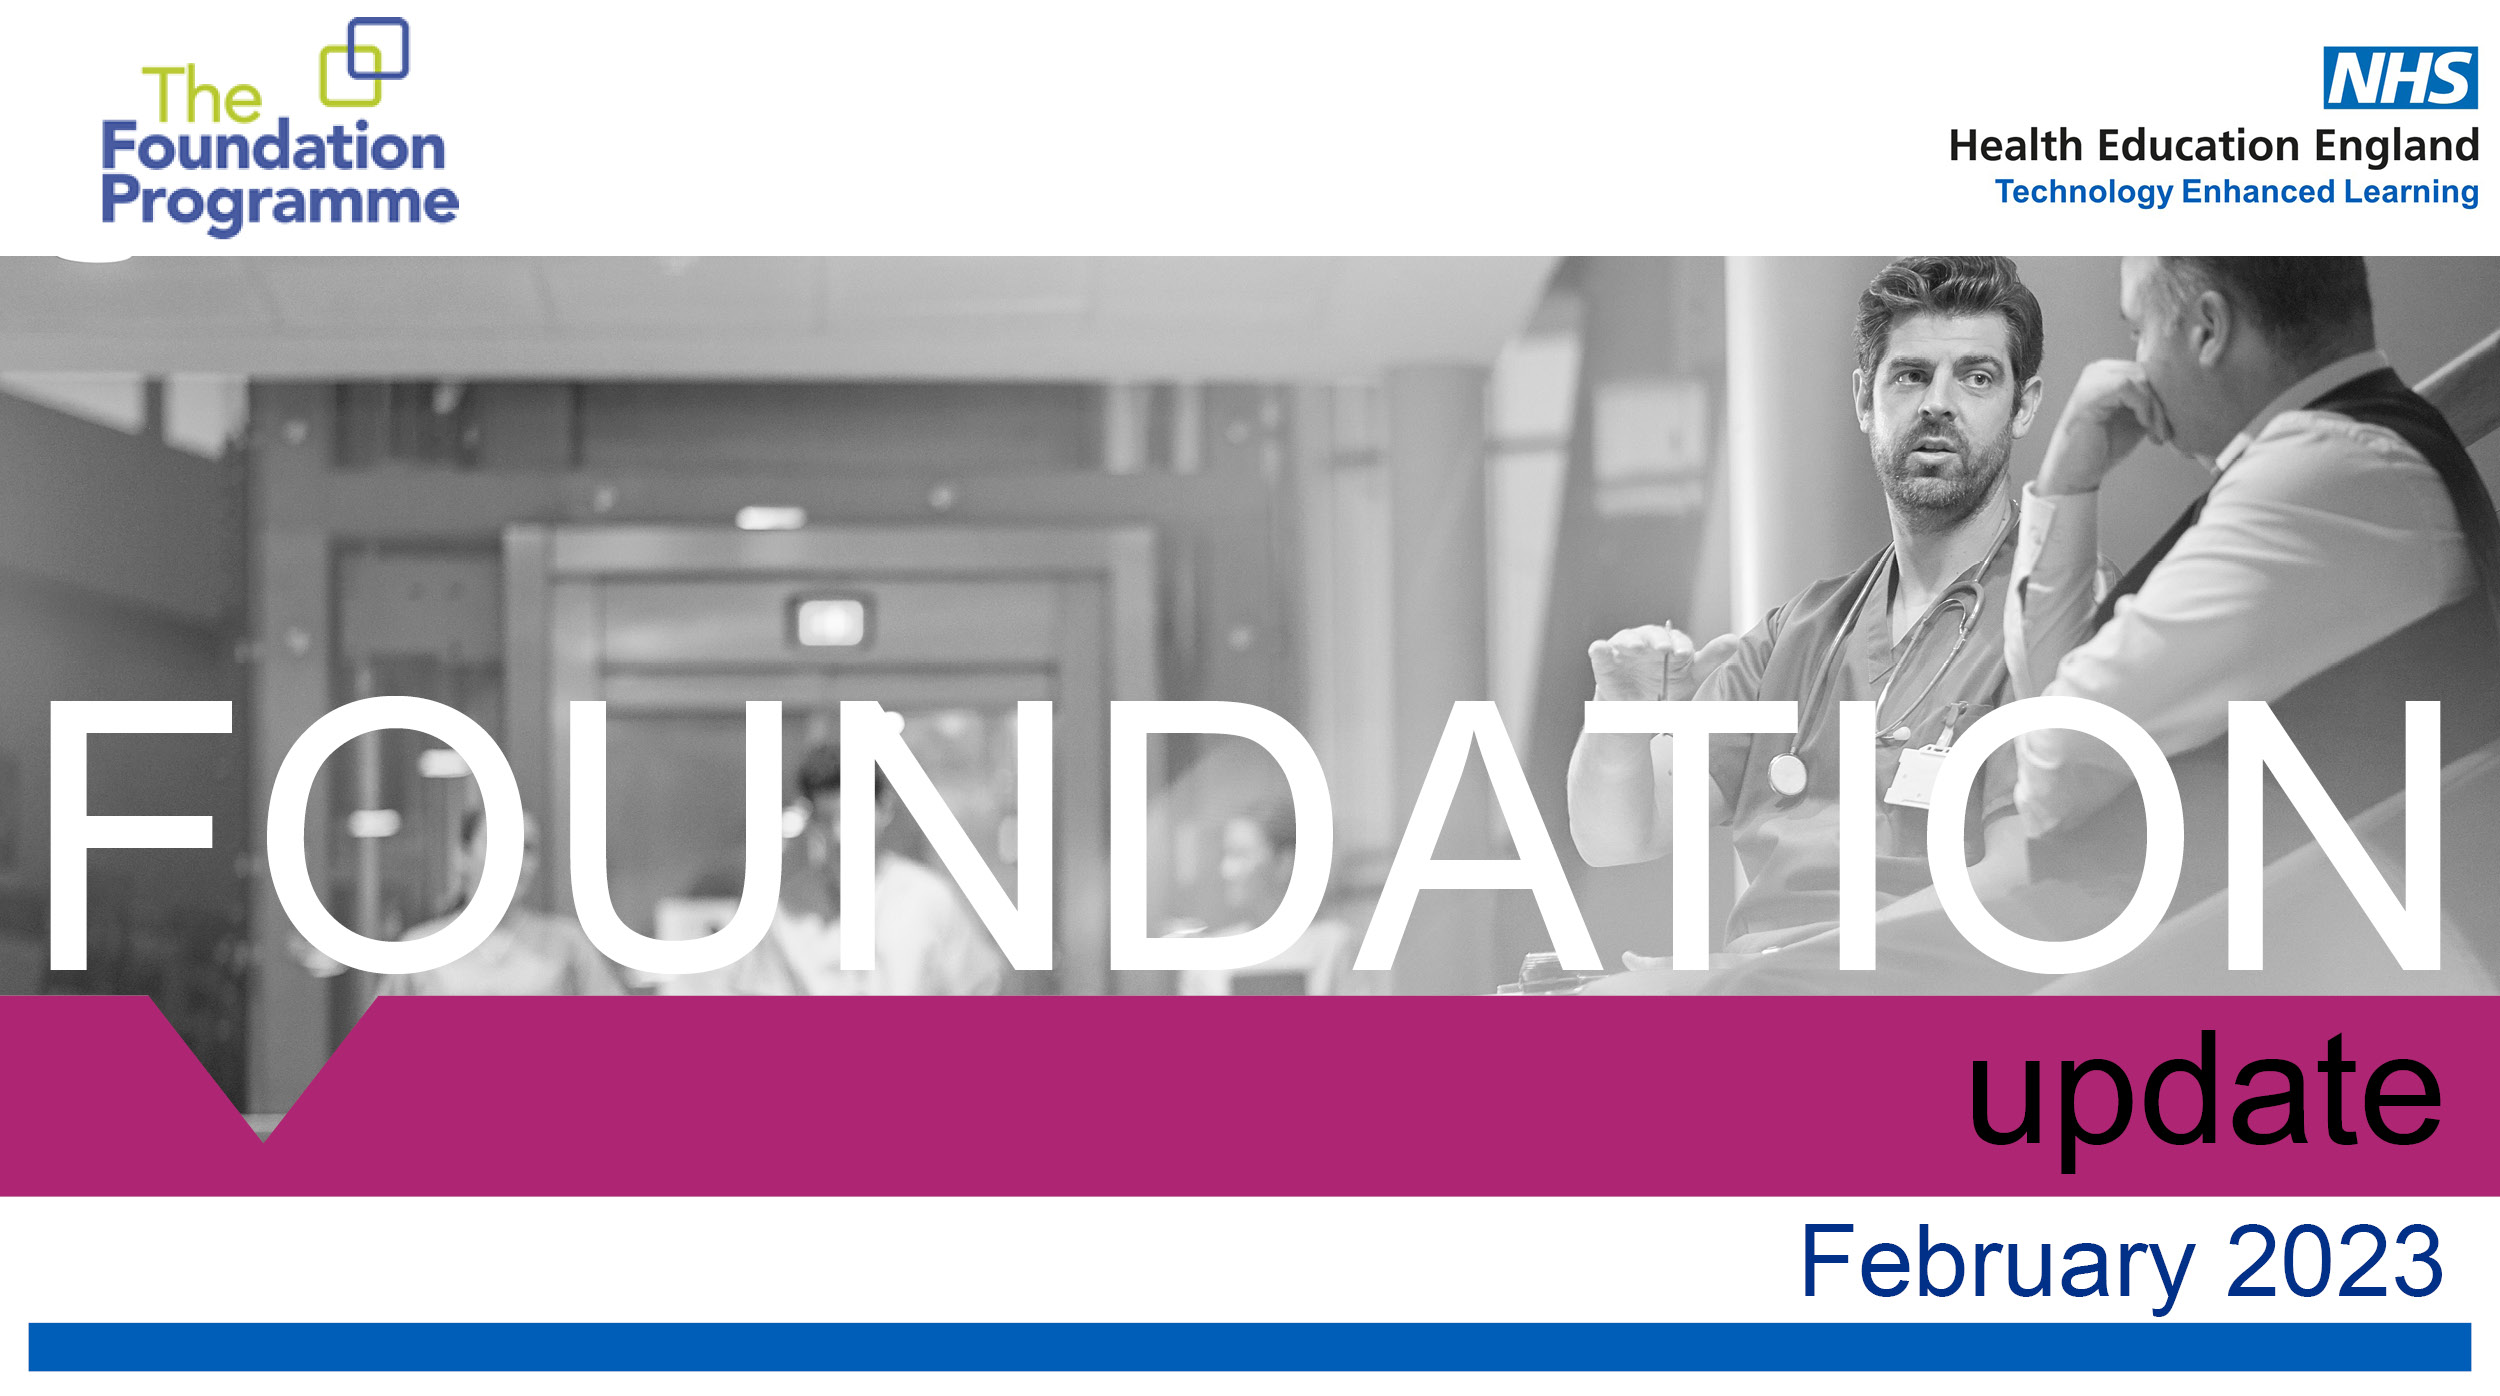 Foundation update 2023: includes an image of a foundation doctor having a conversation in a hospital corridor as three students walk by.